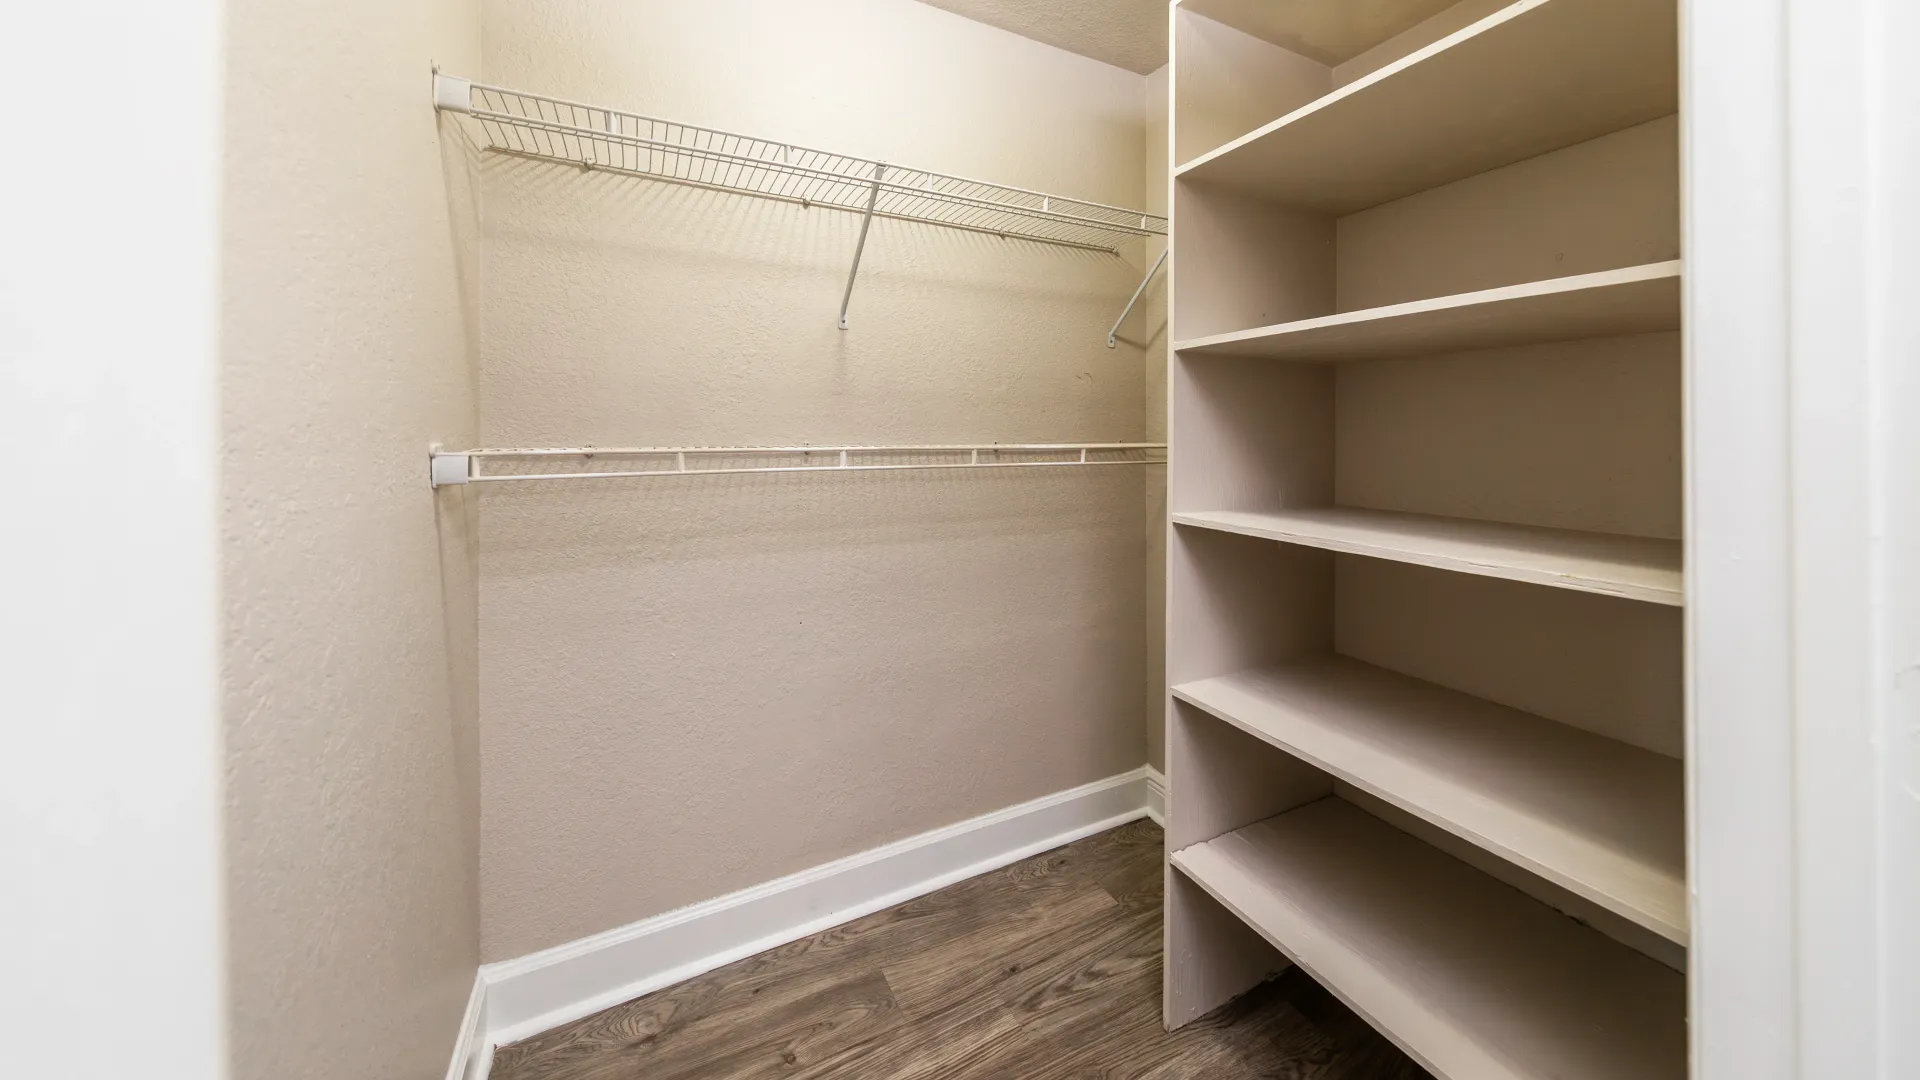 An expansive bedroom closet with two rows of open wire shelving, providing abundant storage space, and an integrated wooden shelf for organizing shoes and accessories.